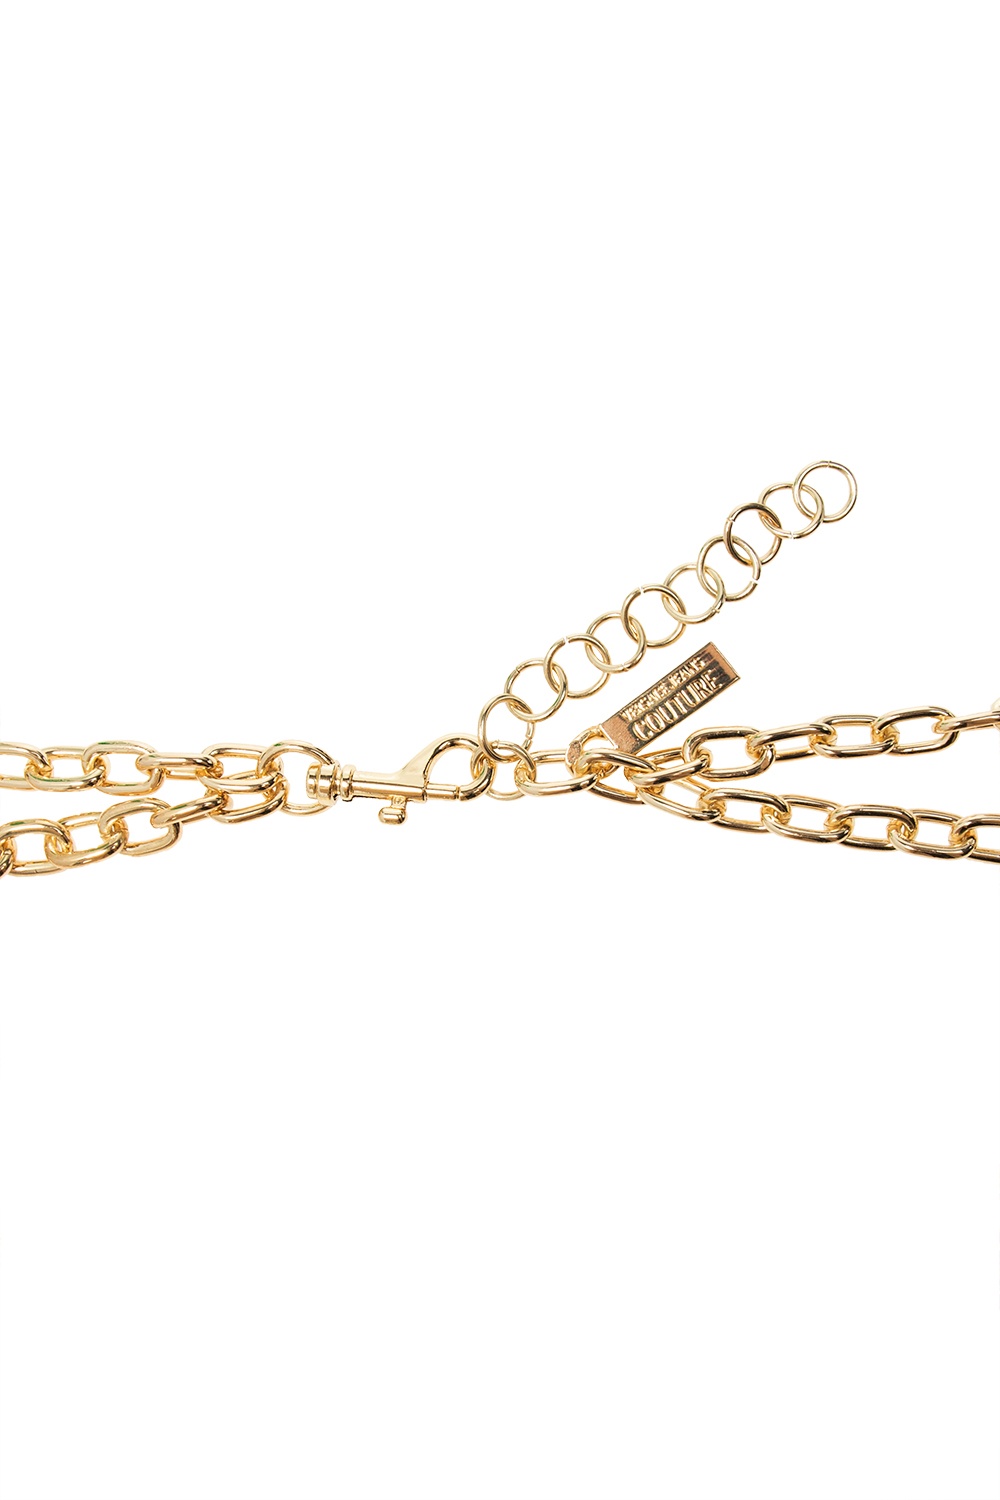 Louis Vuitton x NBA Chain Links Necklace XS Gold/Multicolor in